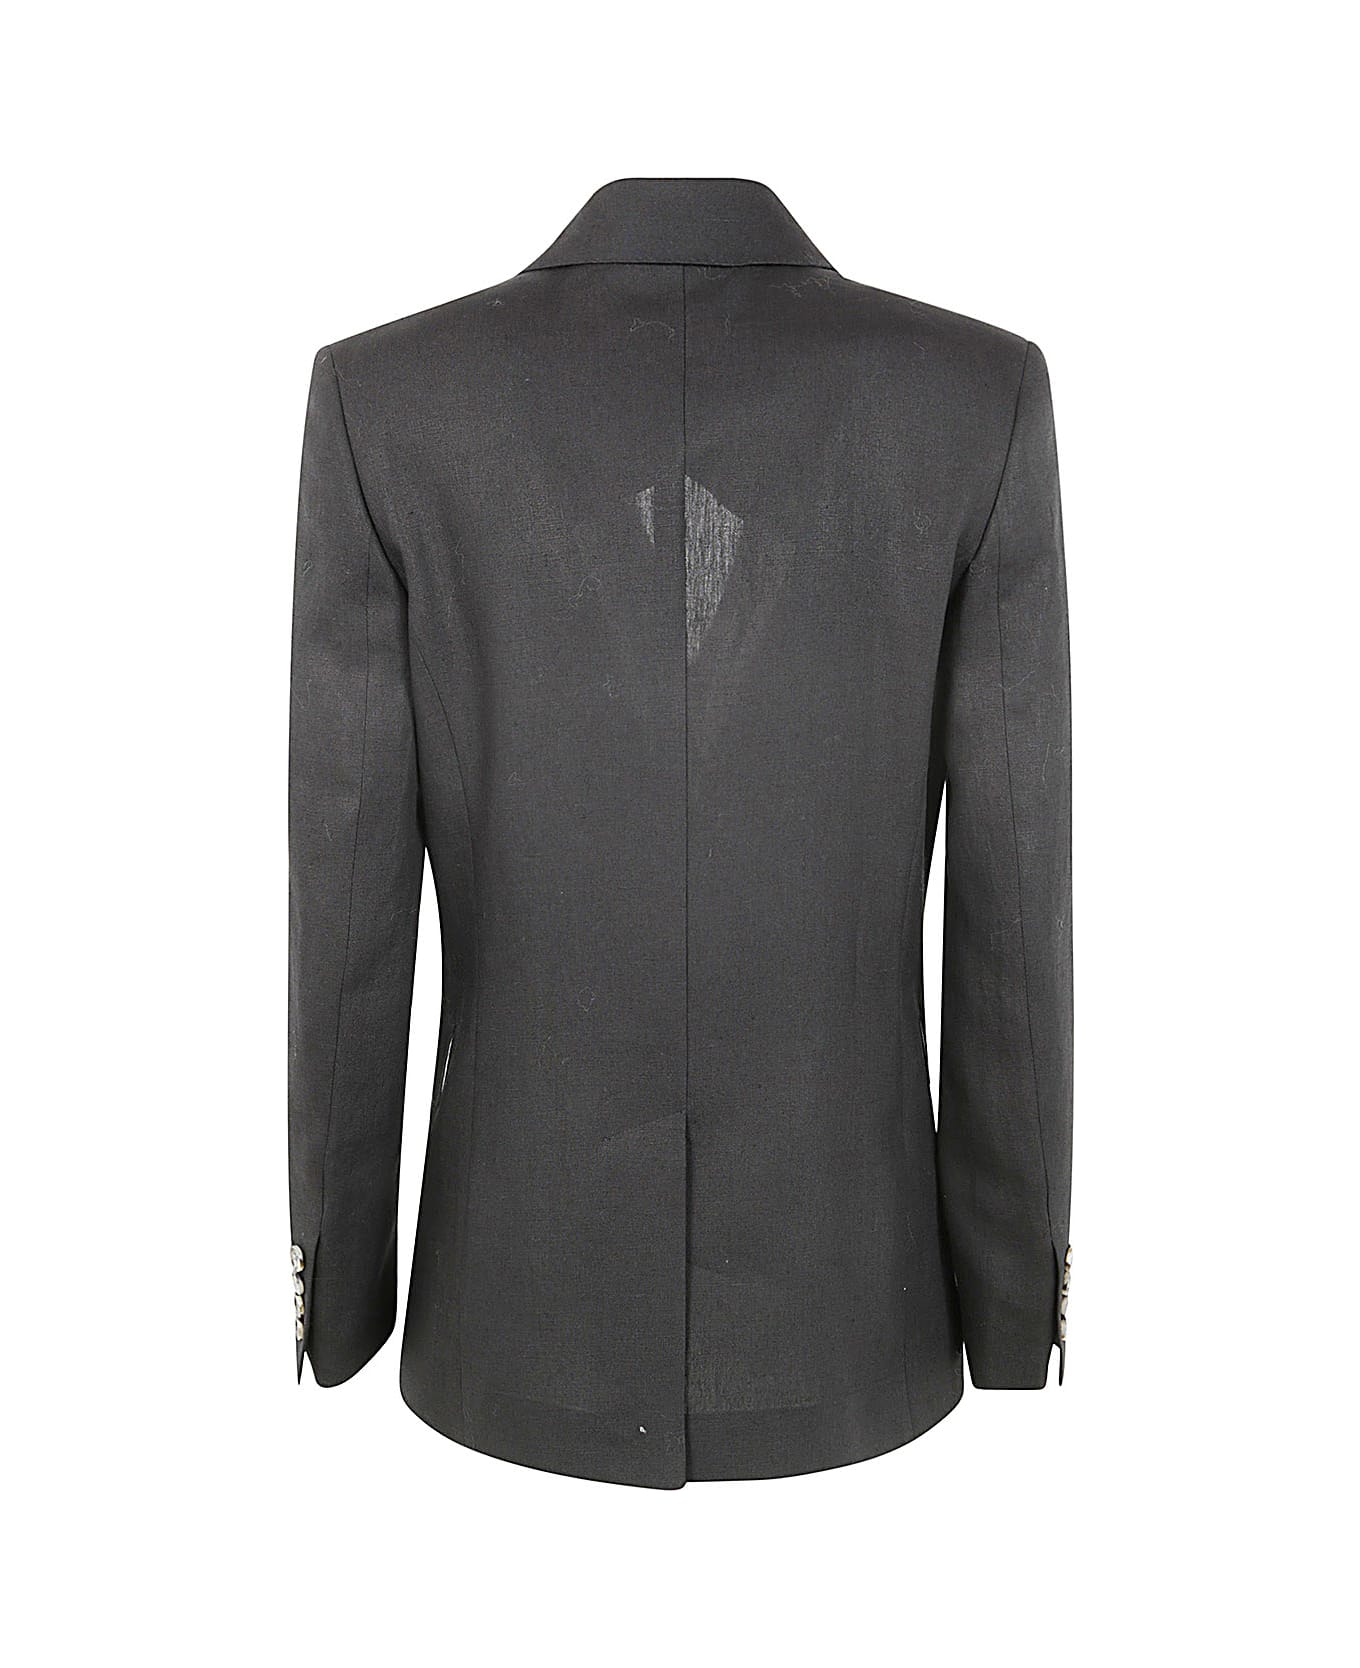 Paul Smith Double Breasted Jacket - Black